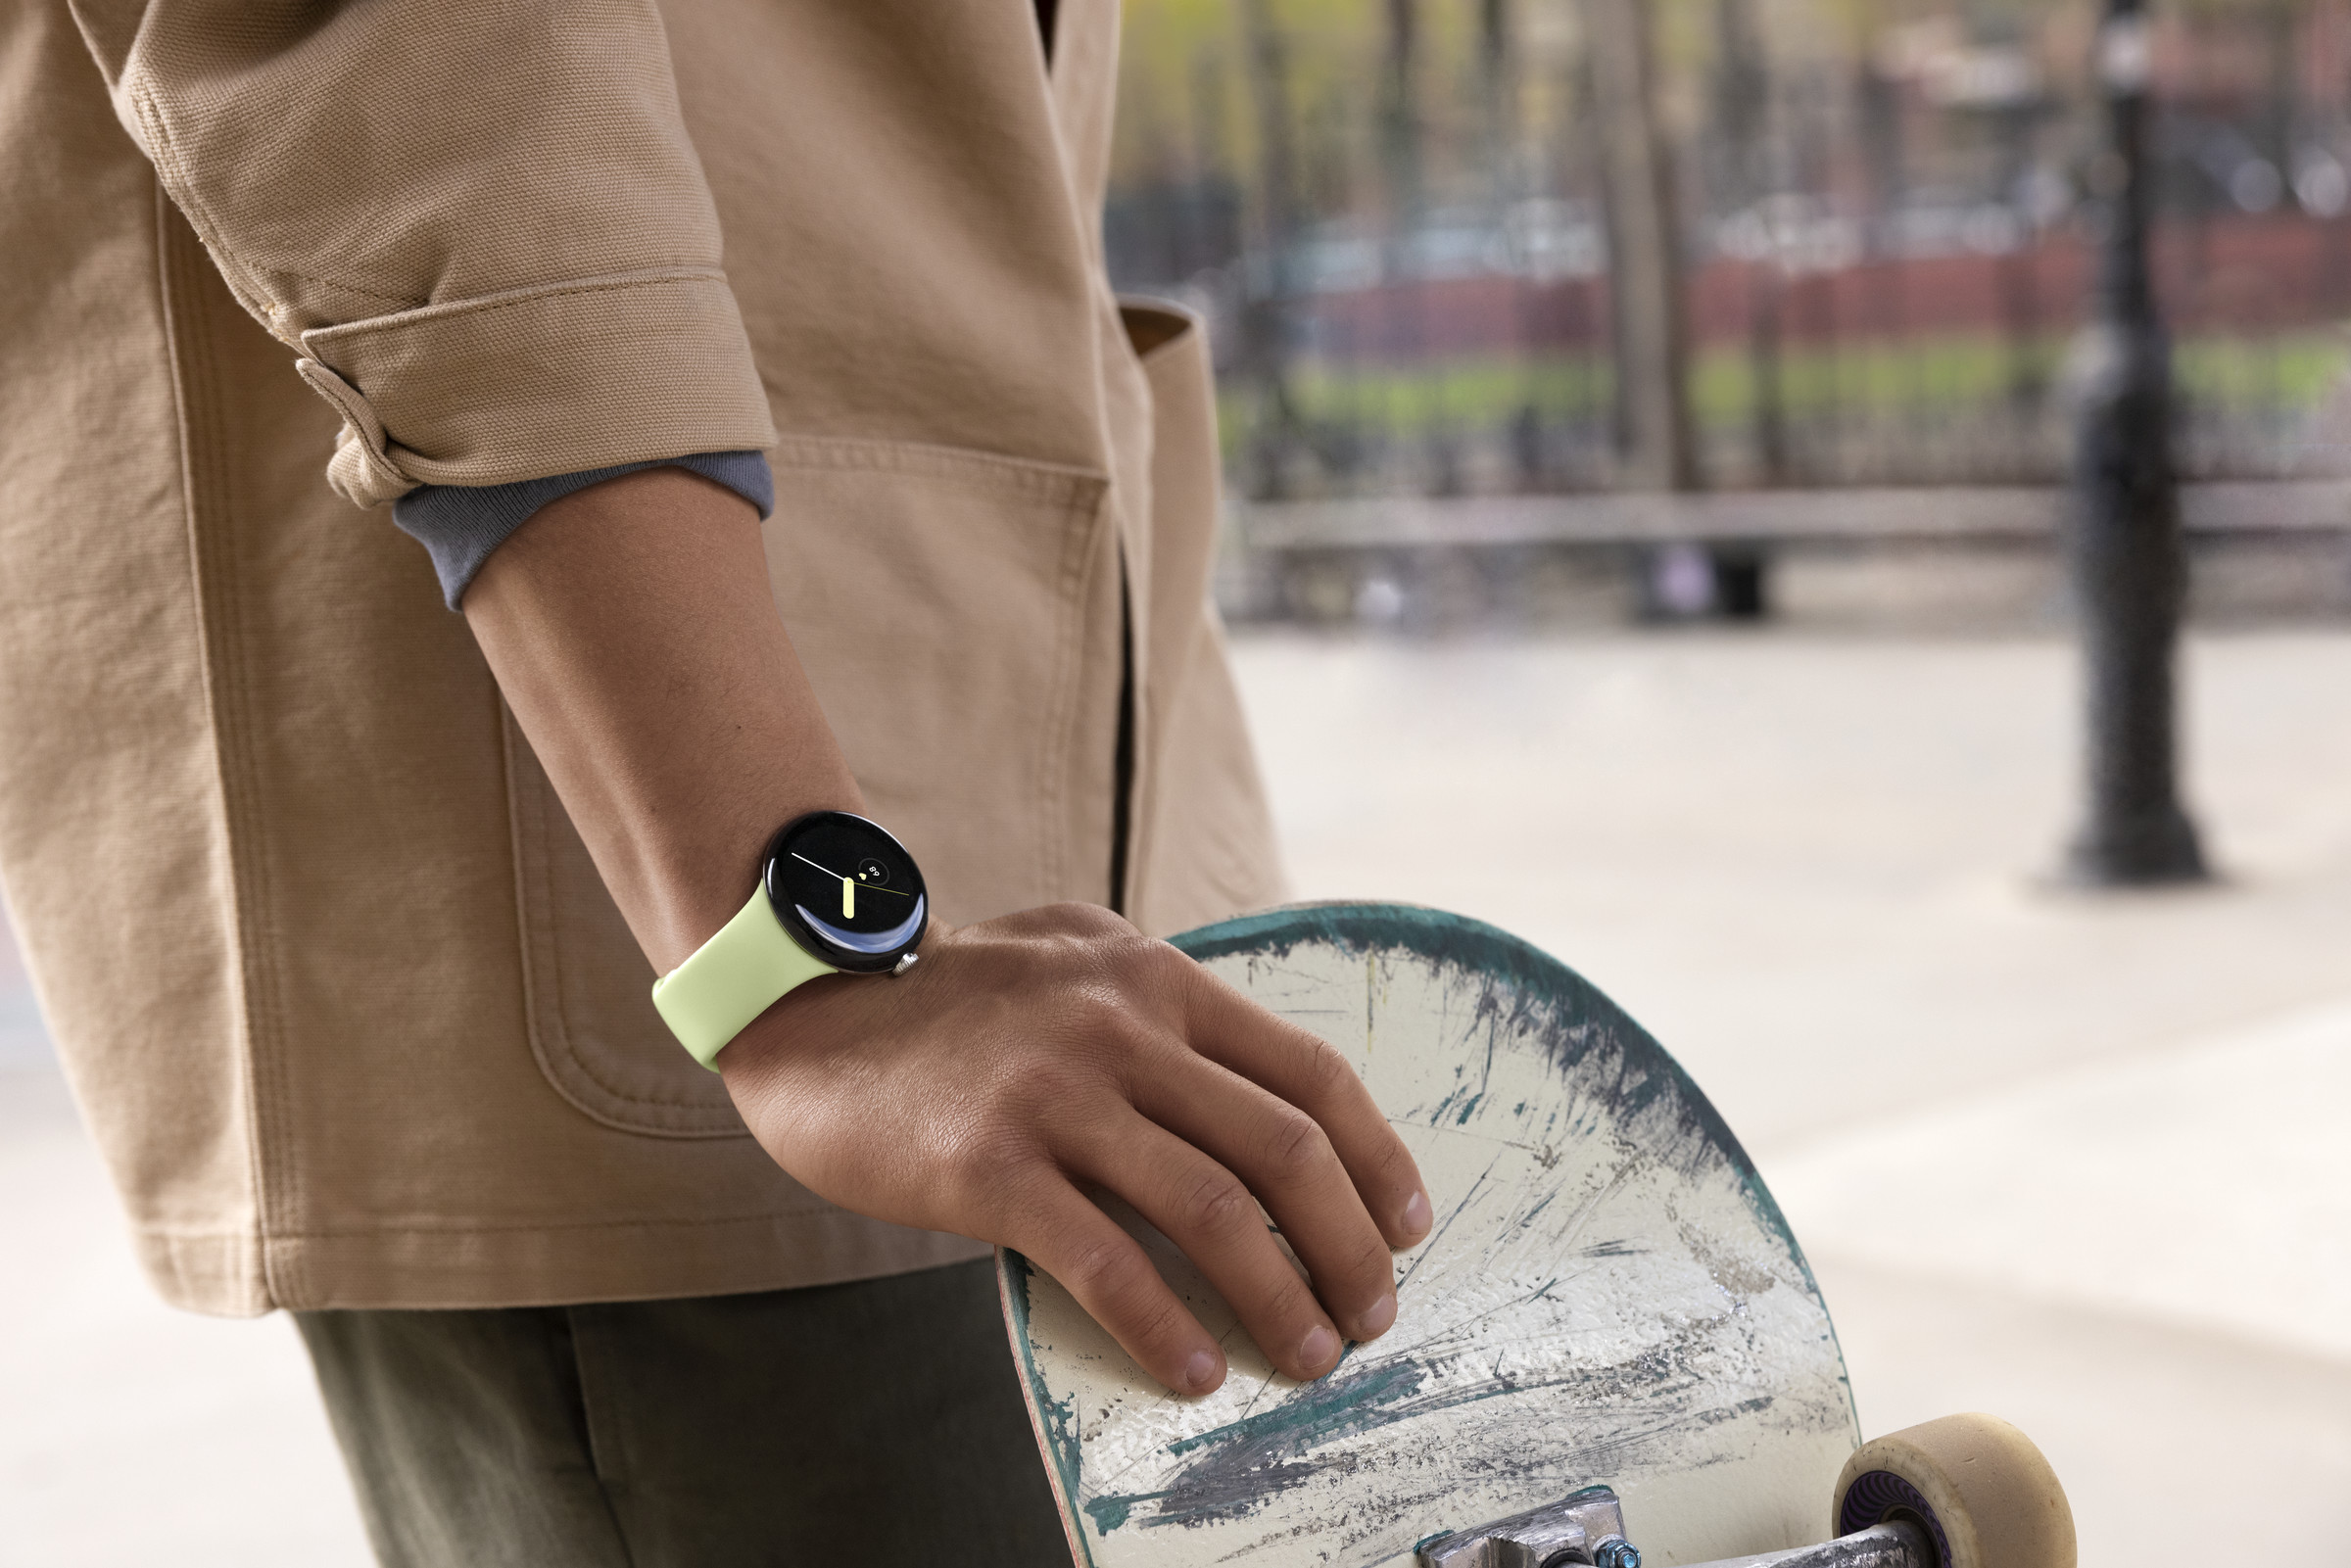 The Lemongrass Pixel Watch on a wrist of someone at a skate park.